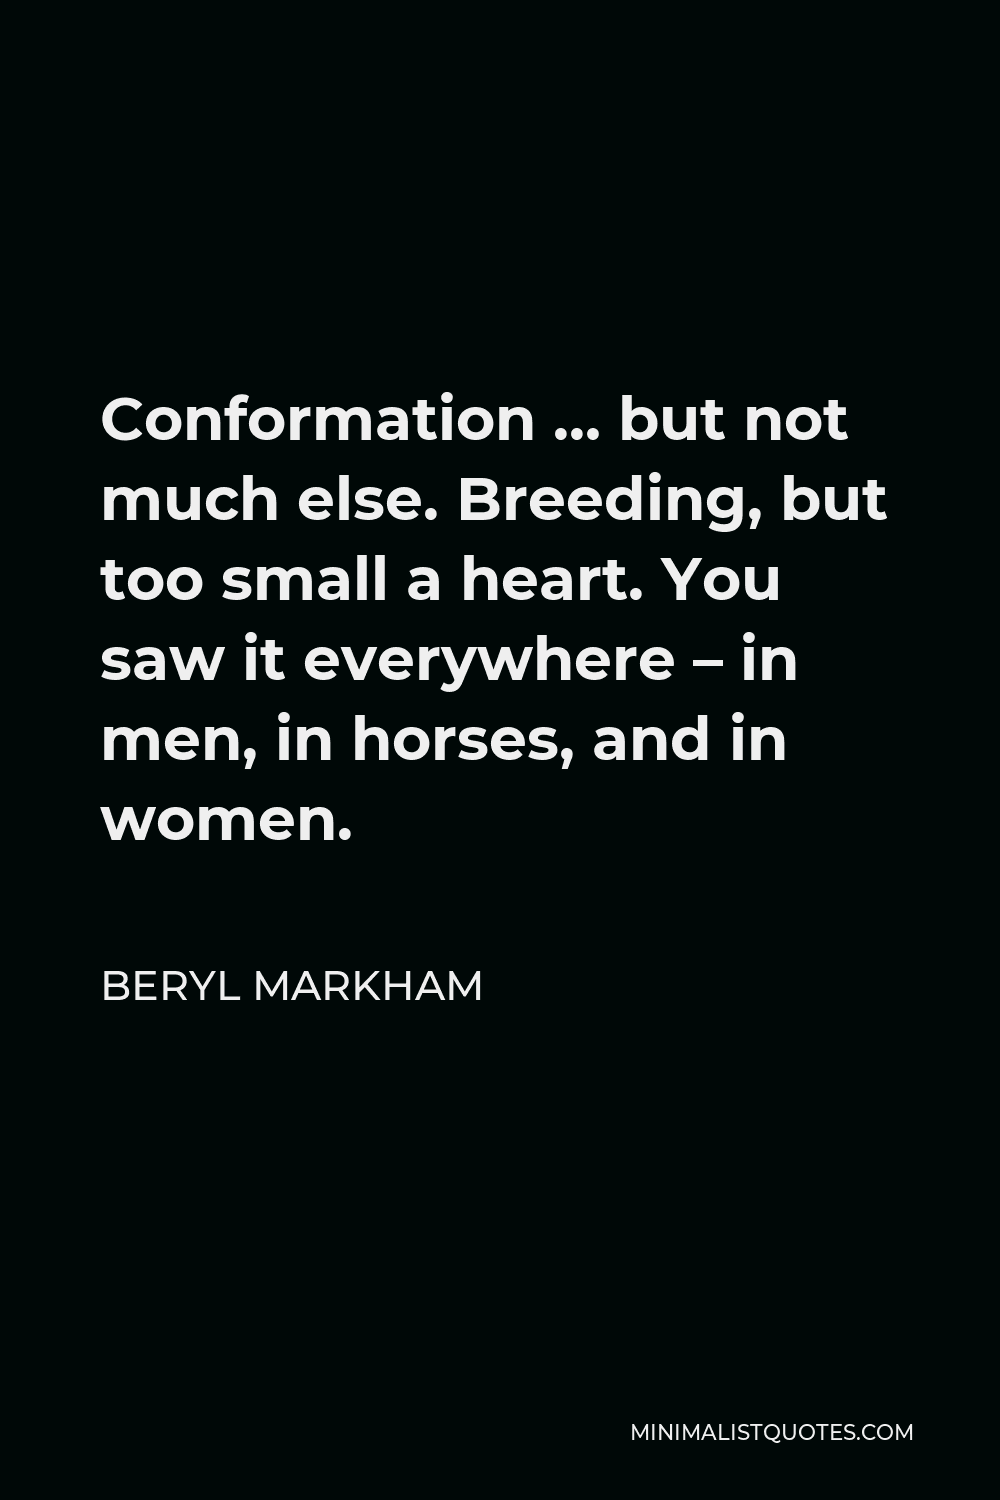 Beryl Markham Quote - Conformation … but not much else. Breeding, but too small a heart. You saw it everywhere – in men, in horses, and in women.